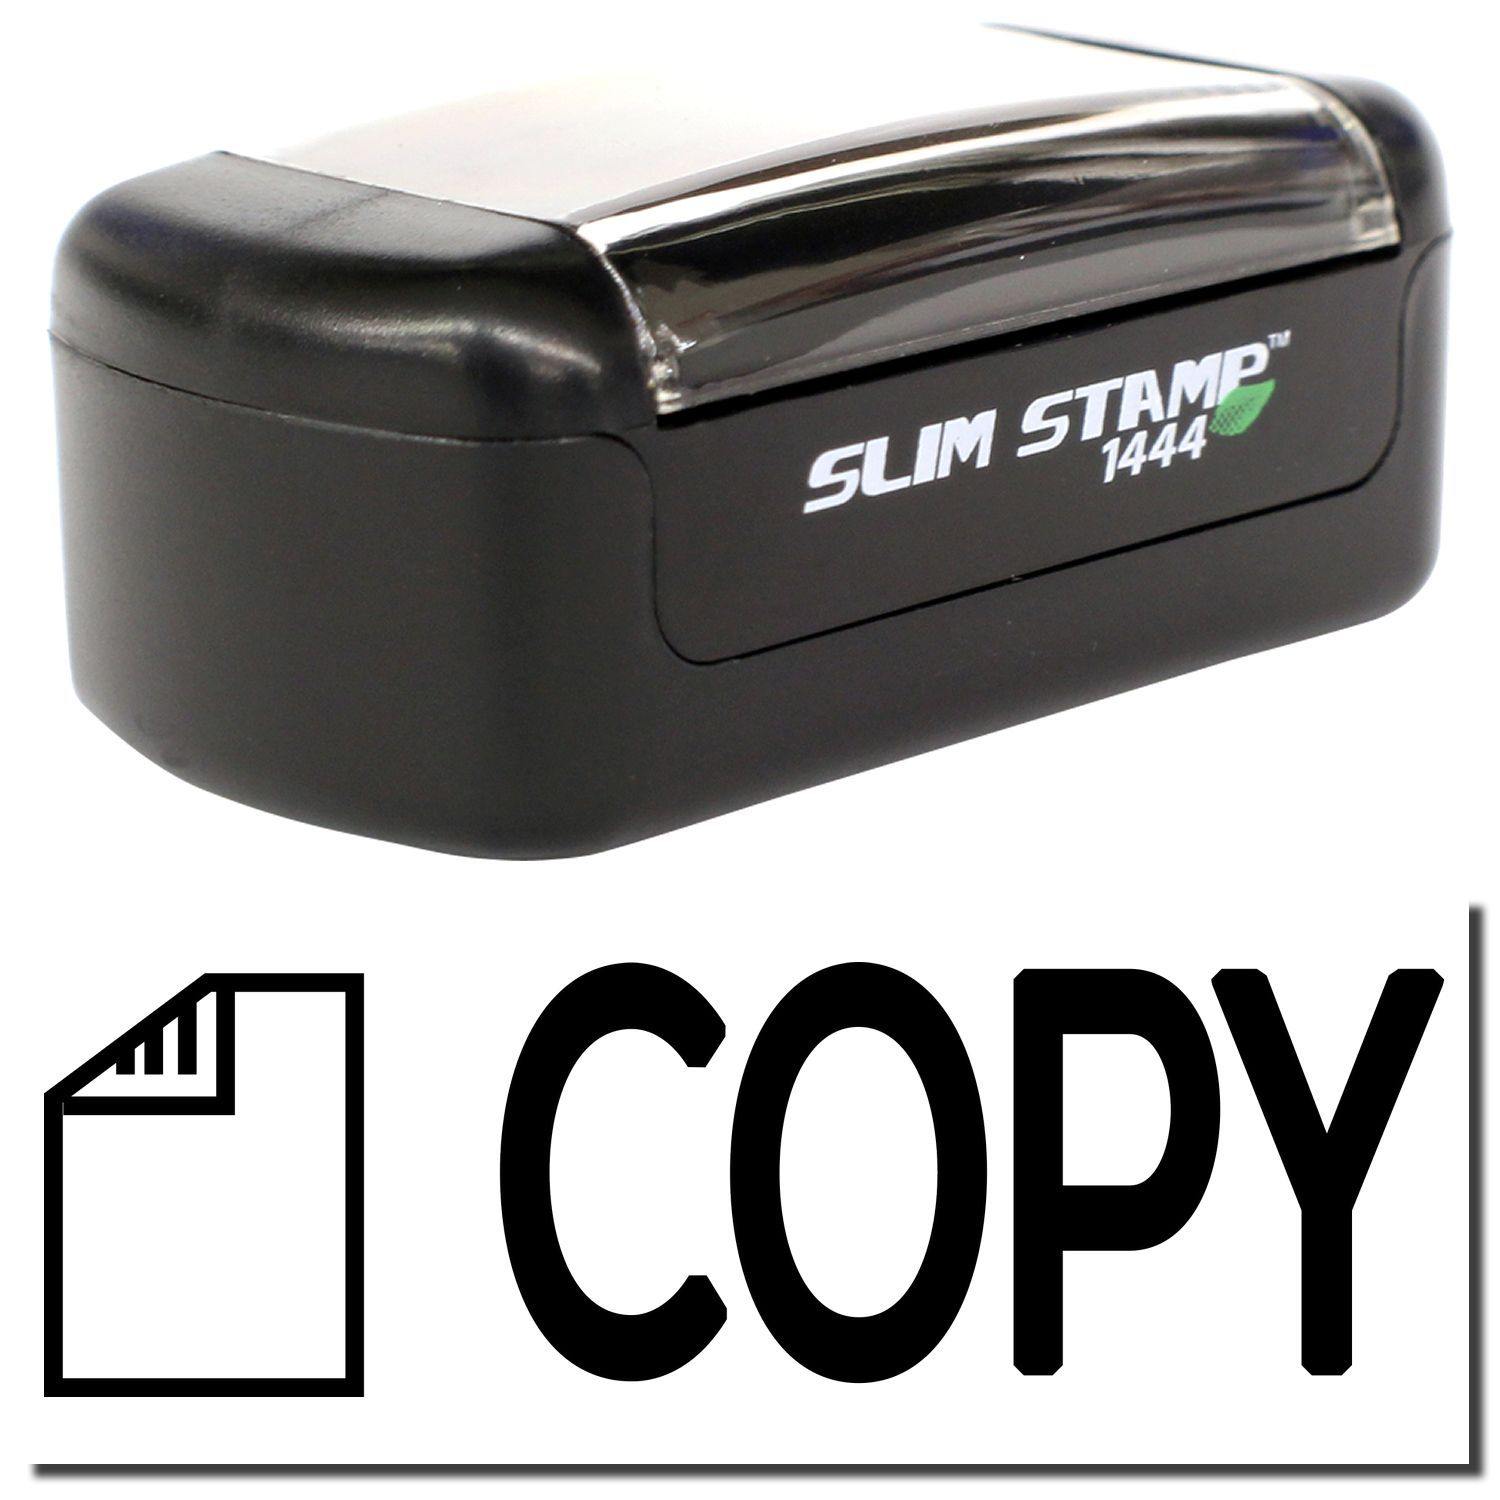 A stock office pre-inked stamp with a stamped image showing how the text "COPY" in a bold font and a small image of a letter on the left is displayed after stamping.